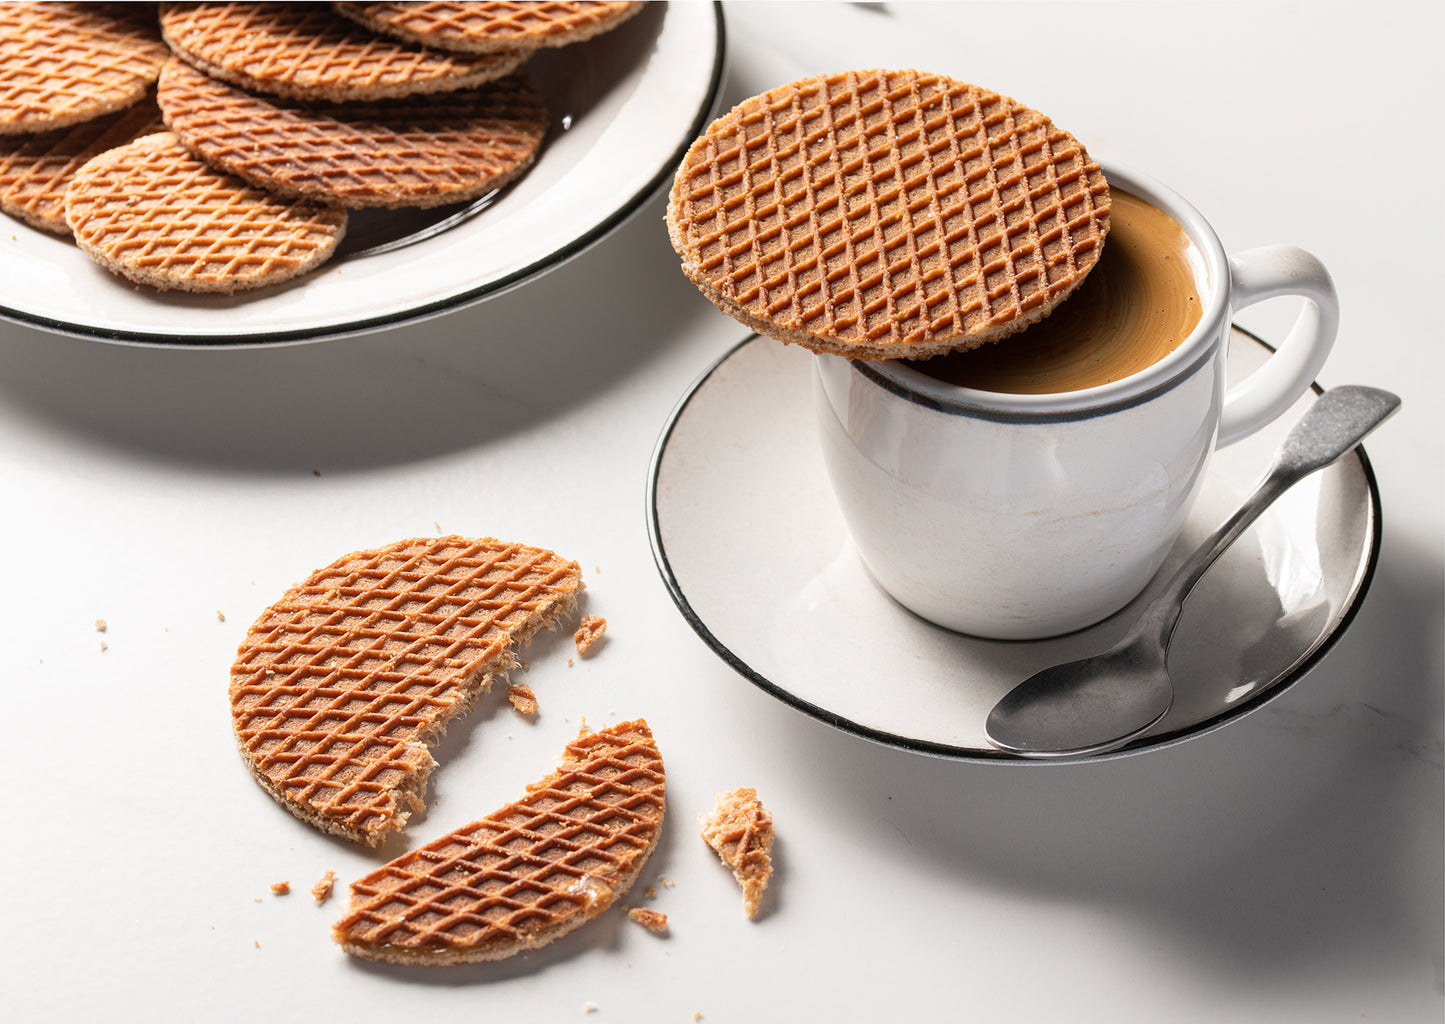 Authentic Wonderen Stroopwafels - 8 pack on a white plate.